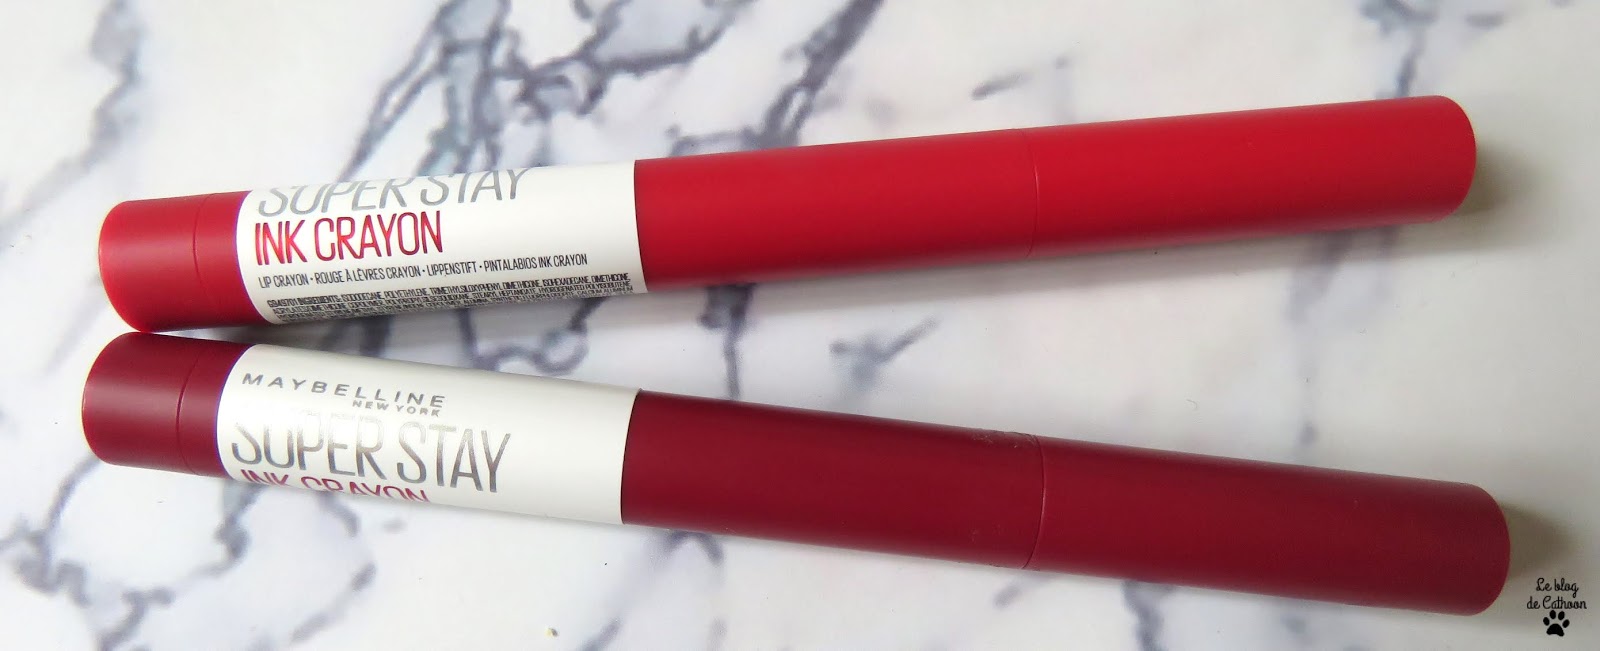 Superstay Ink Crayon - Maybelline